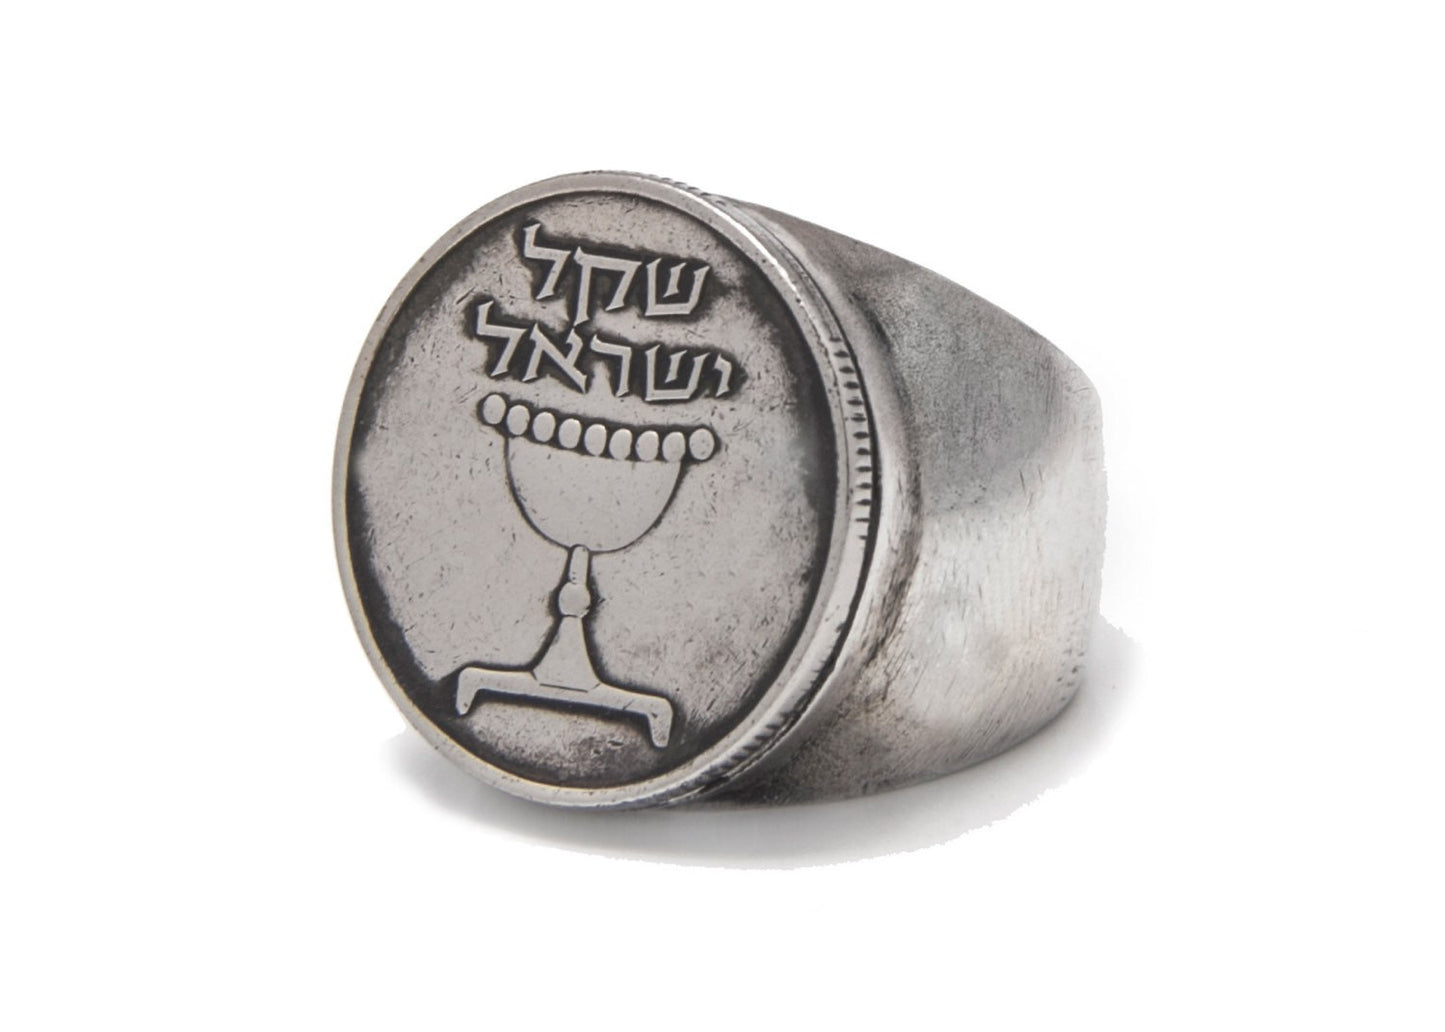 Israeli Old, collector's Coin Ring - 1 Sheqel Coin of Israel